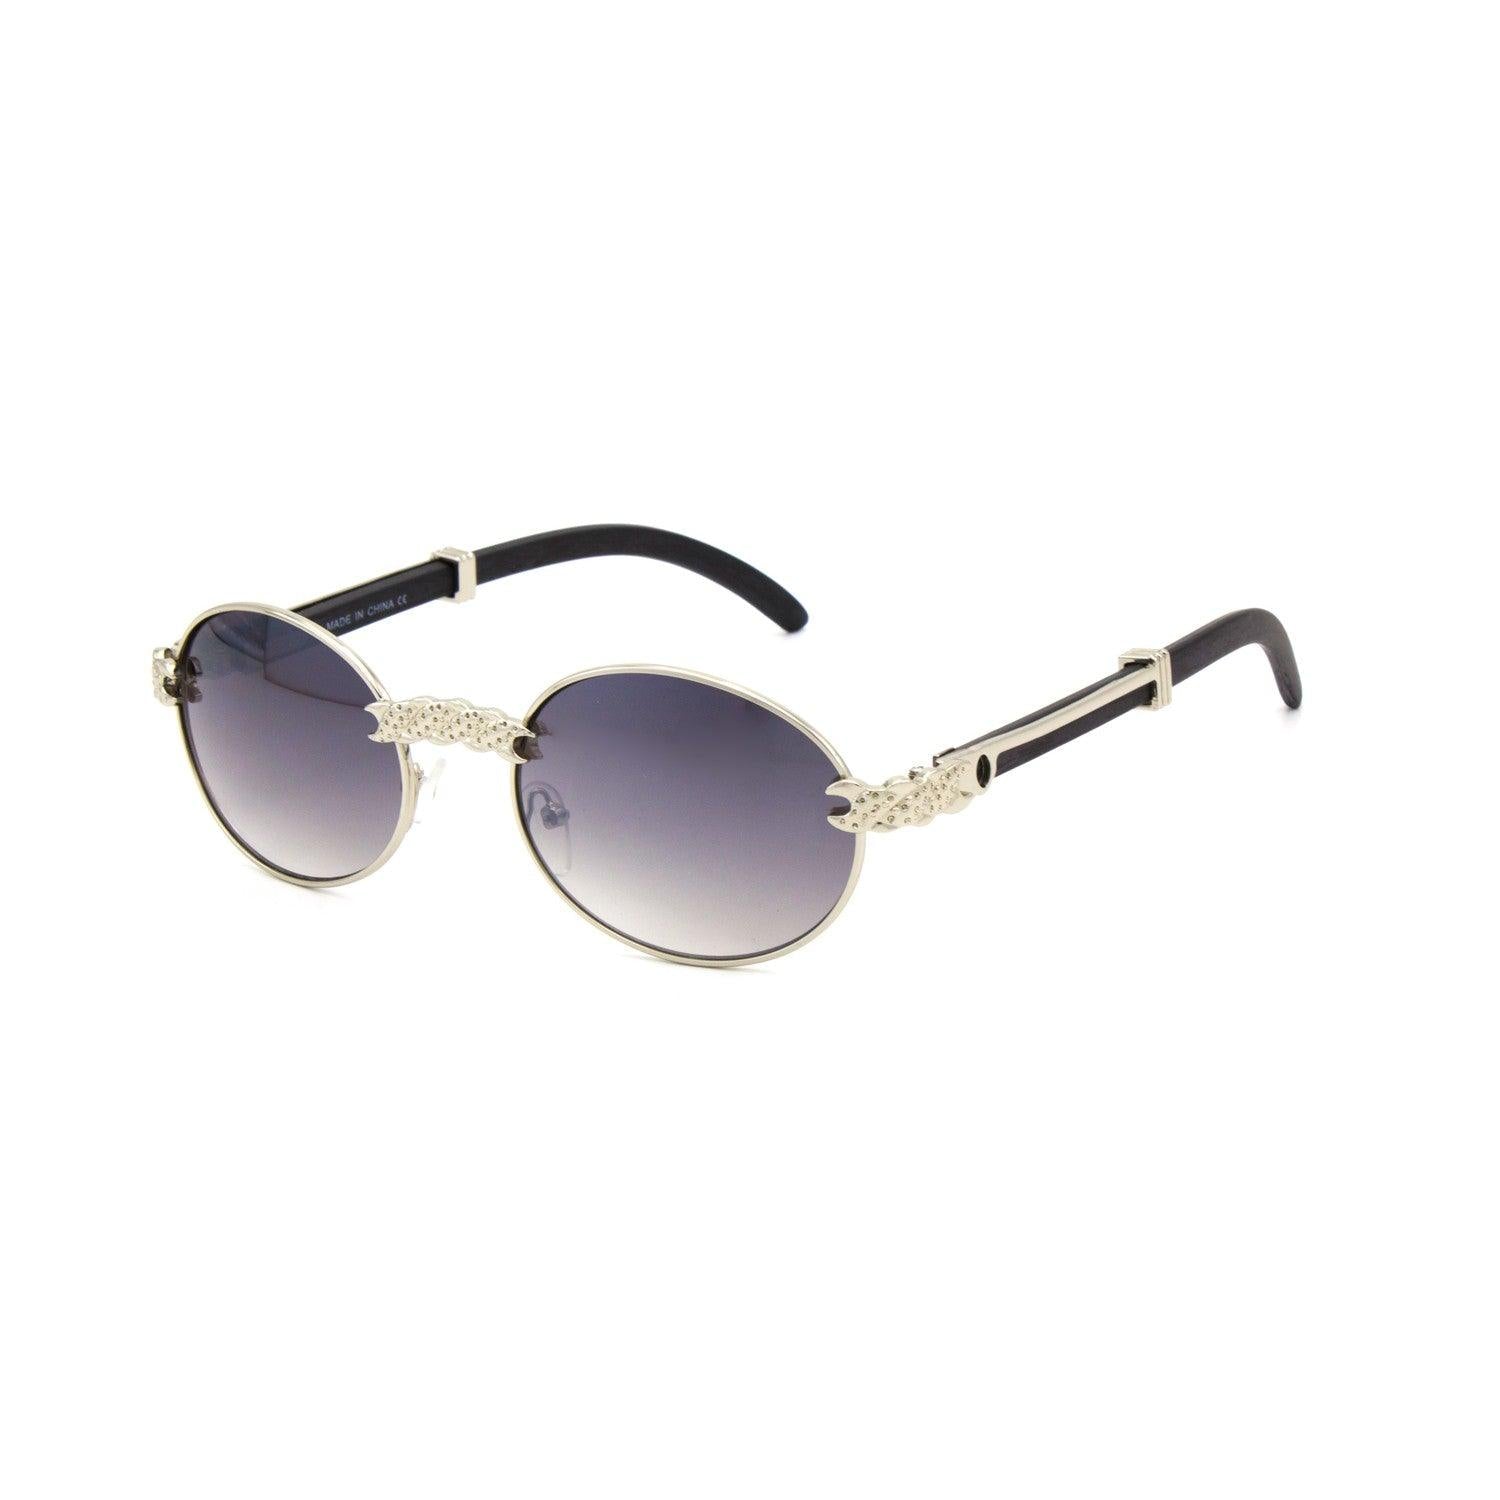 "Winter Vibes" Round Metal Frames - Weekend Shade Sunglasses